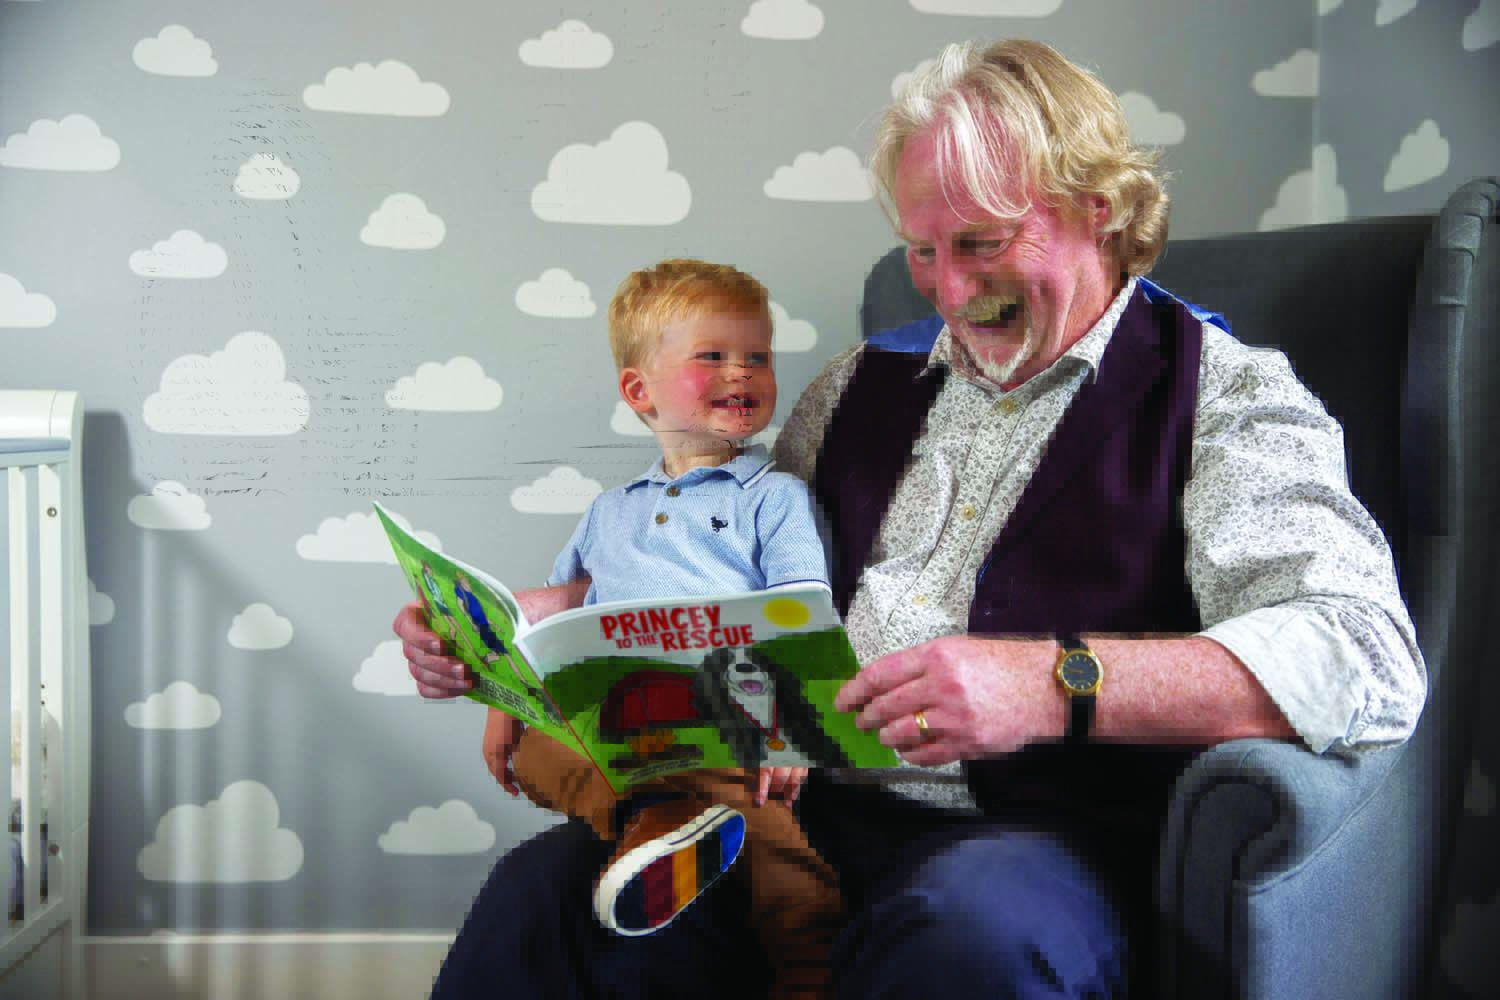 Princey the dog Norman Macdonald reading his new book, Princey To The Rescue to his grandson, Jude McGhee who had inspired him to write the story